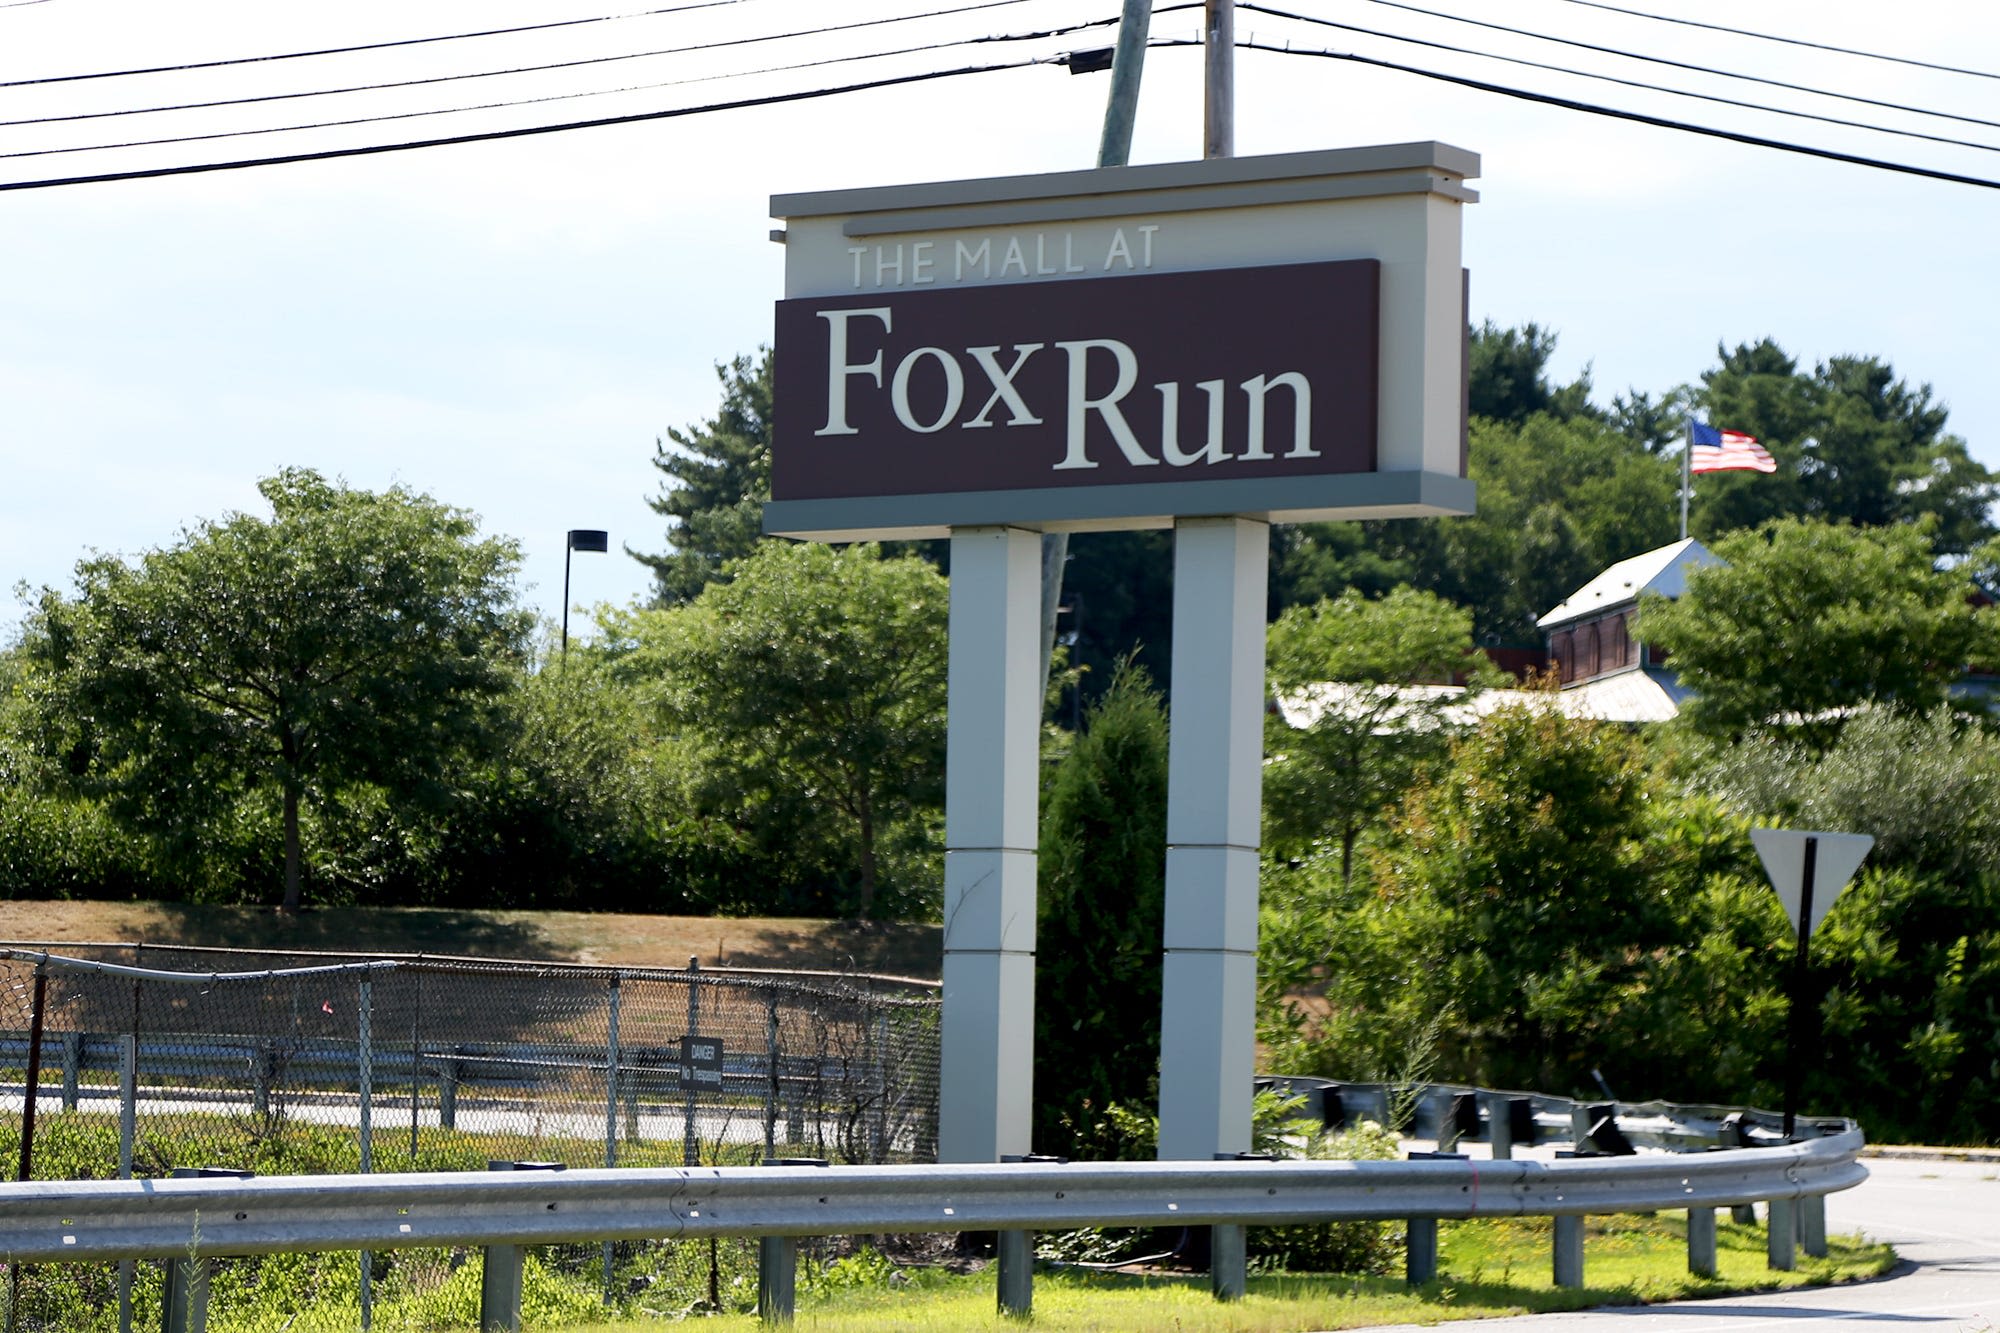 After more than a decade at Mall at Fox Run, this store is closing following bankruptcy